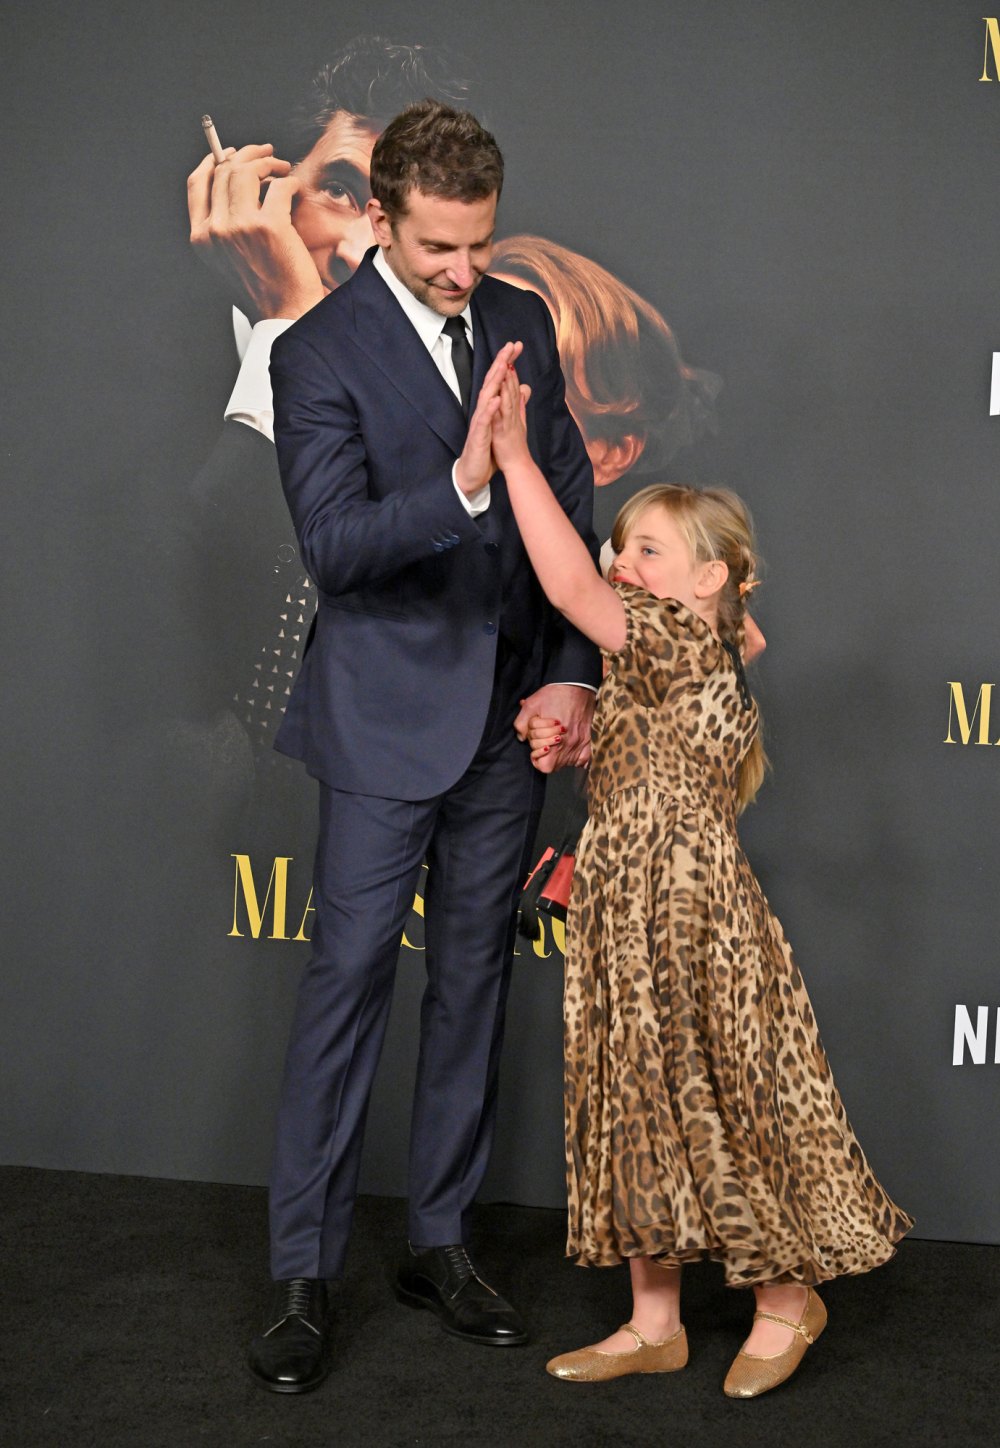 Bradley Cooper Celebrates Maestro Premiere With Daughter Lea by His Side